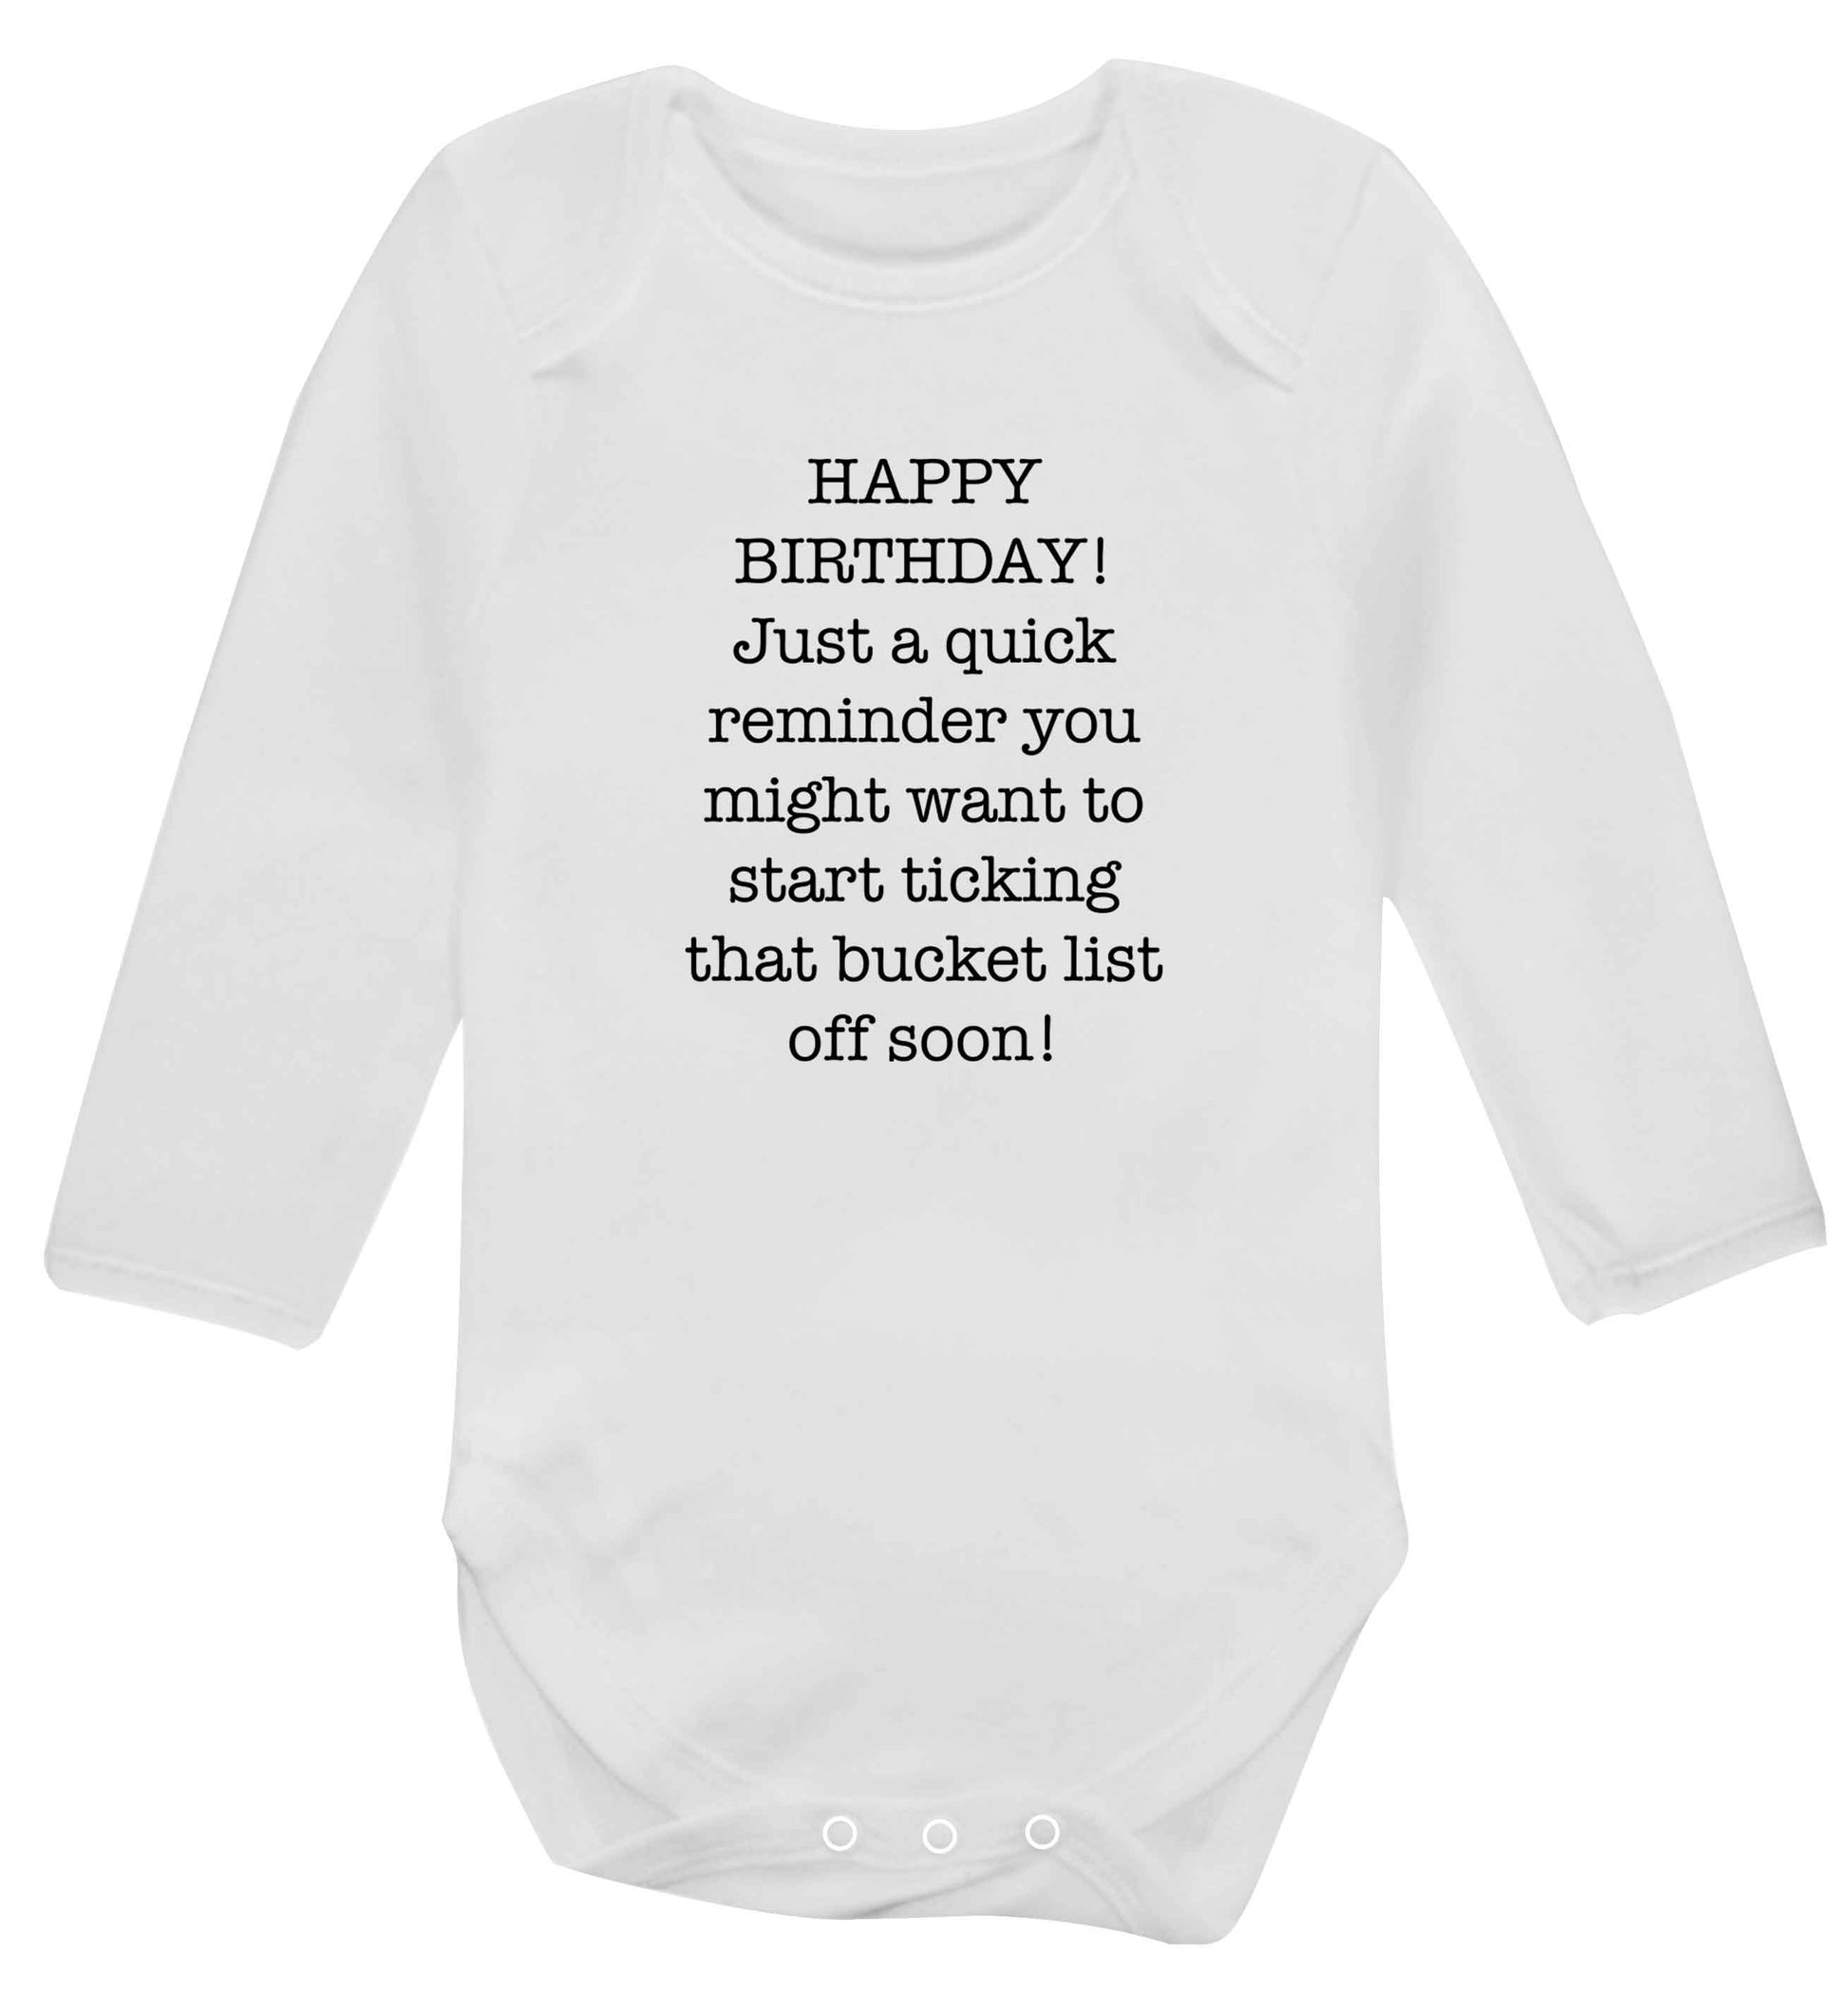 Happy birthday, just a quick reminder you might want to start ticking that bucket list off soon baby vest long sleeved white 6-12 months